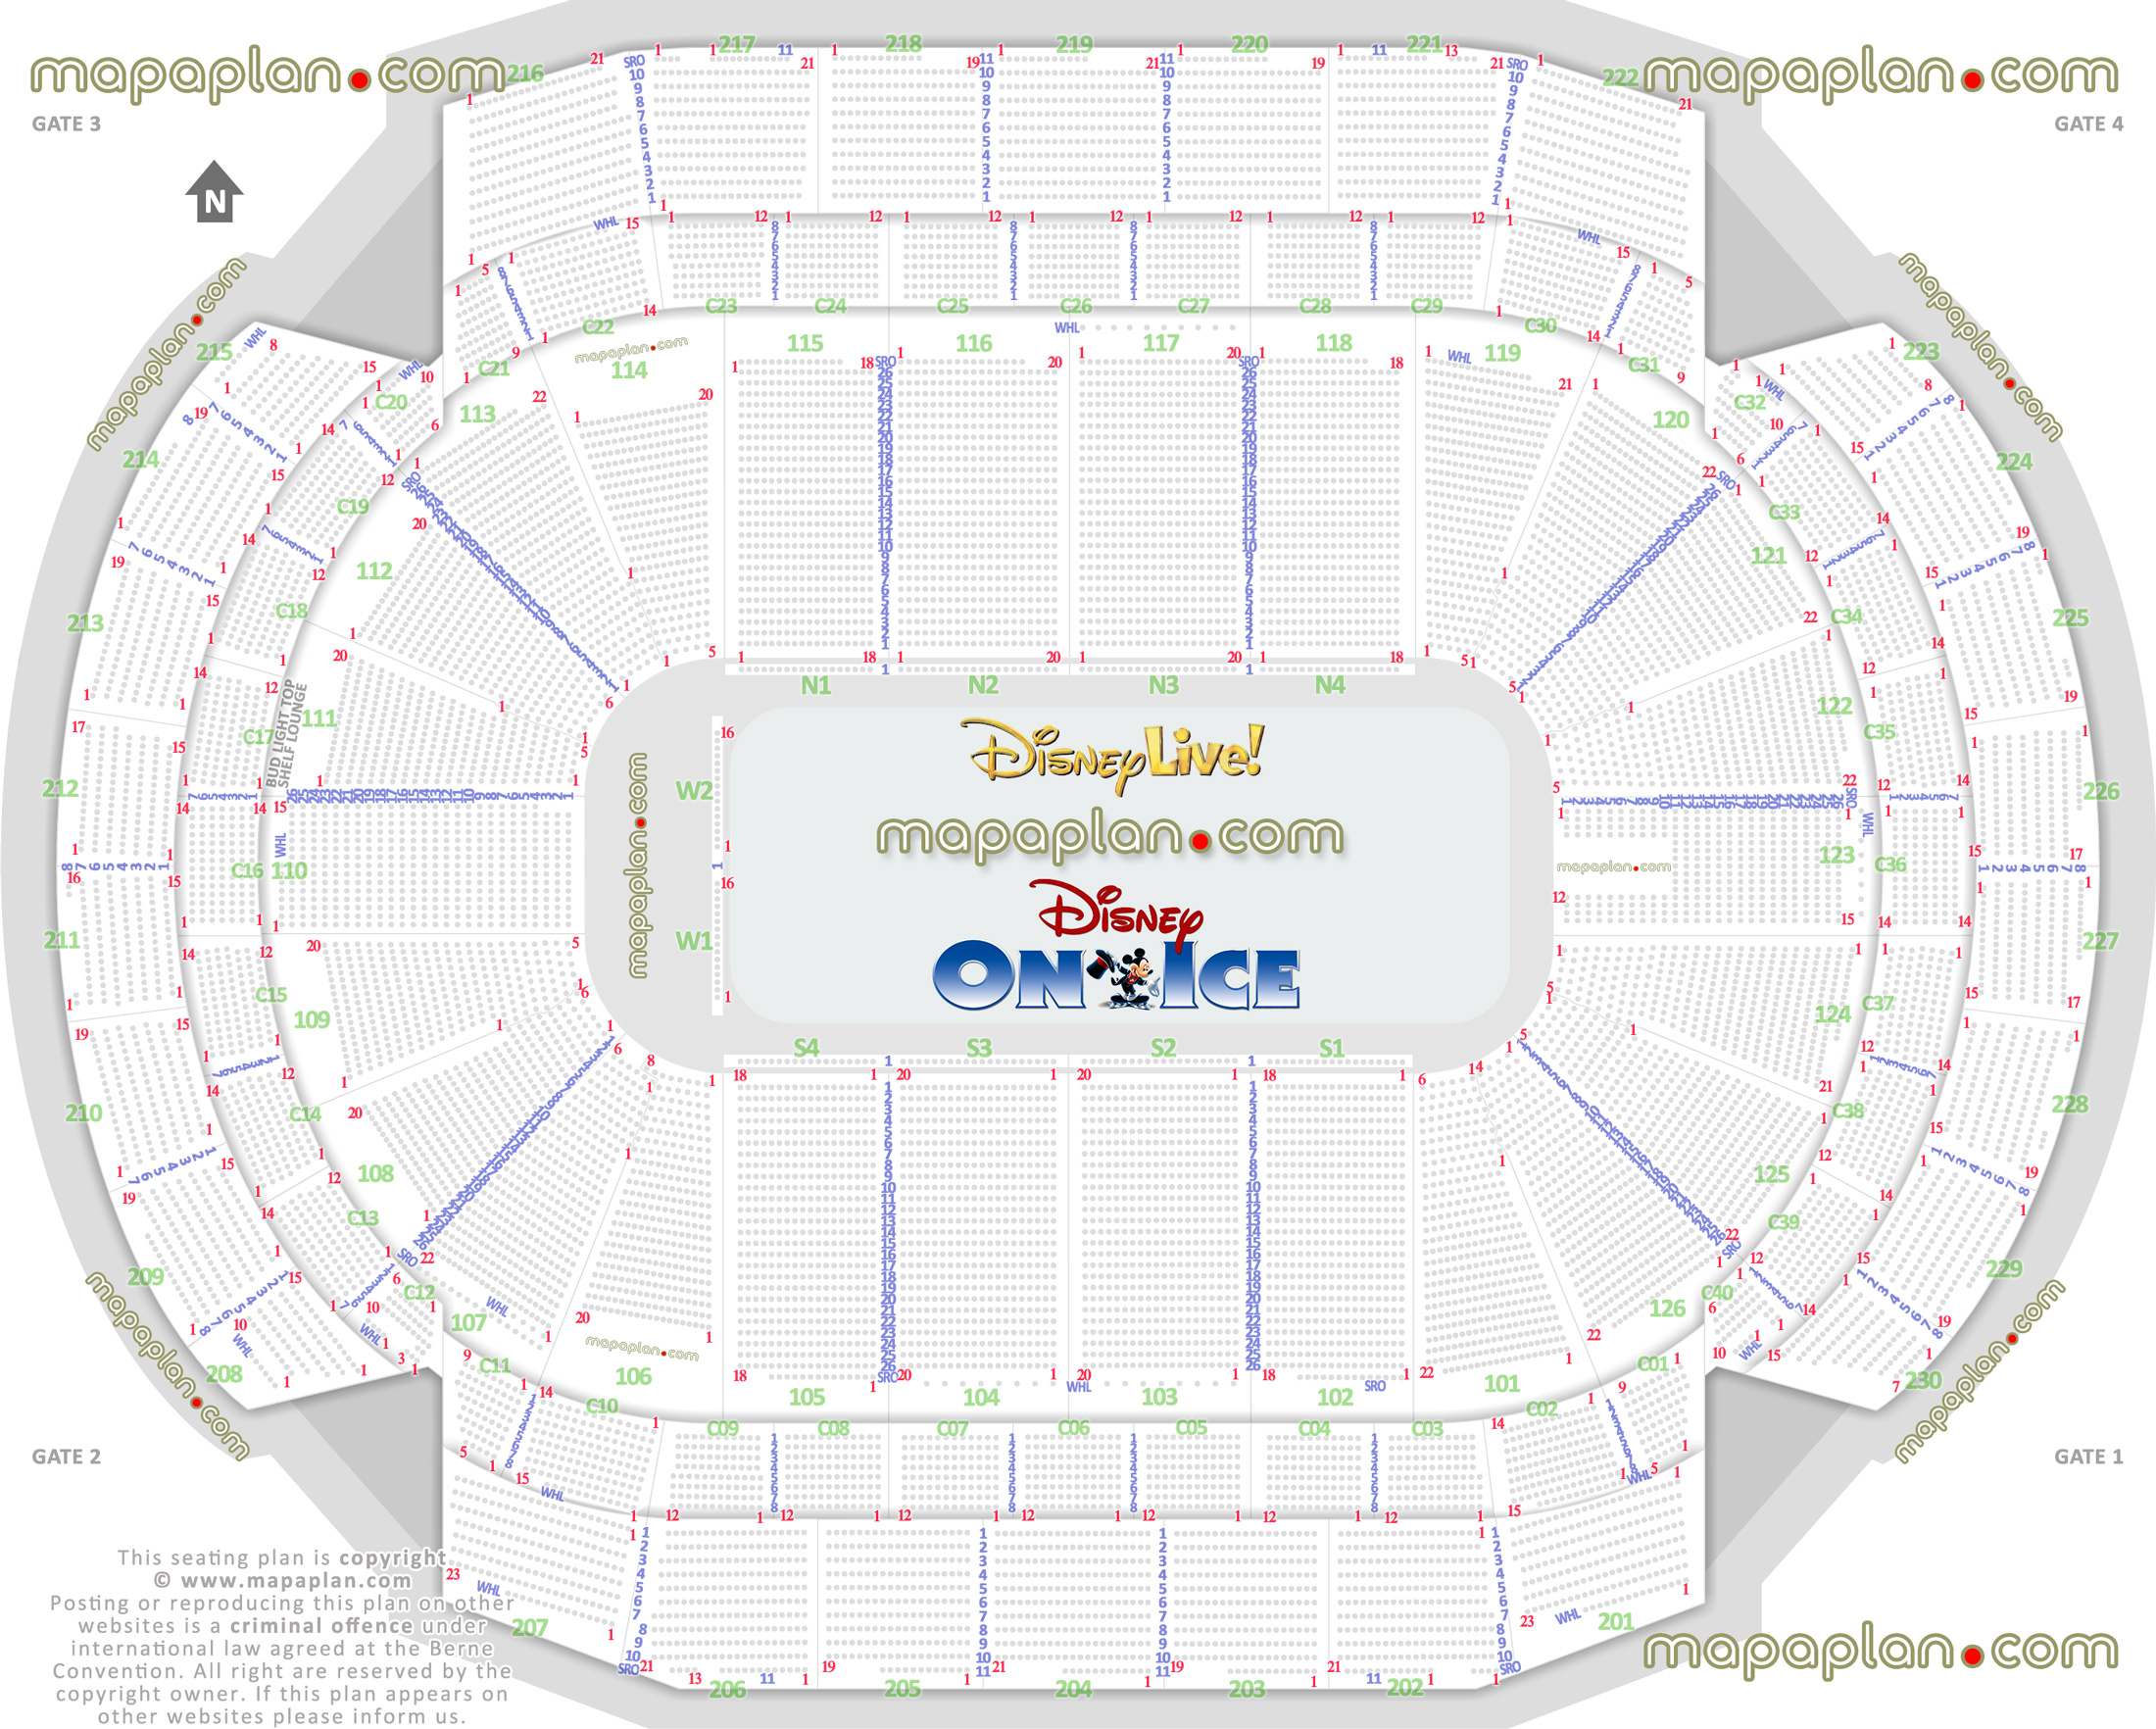 disney ice live saint paul mn usa best seat finder 3d interactive tool precise detailed aisle seat row whl sro numbering location data plan ice rink event floor level lower bowl concourseclub upper balcony seating suites loge boxes Saint Paul Xcel Energy Center seating chart